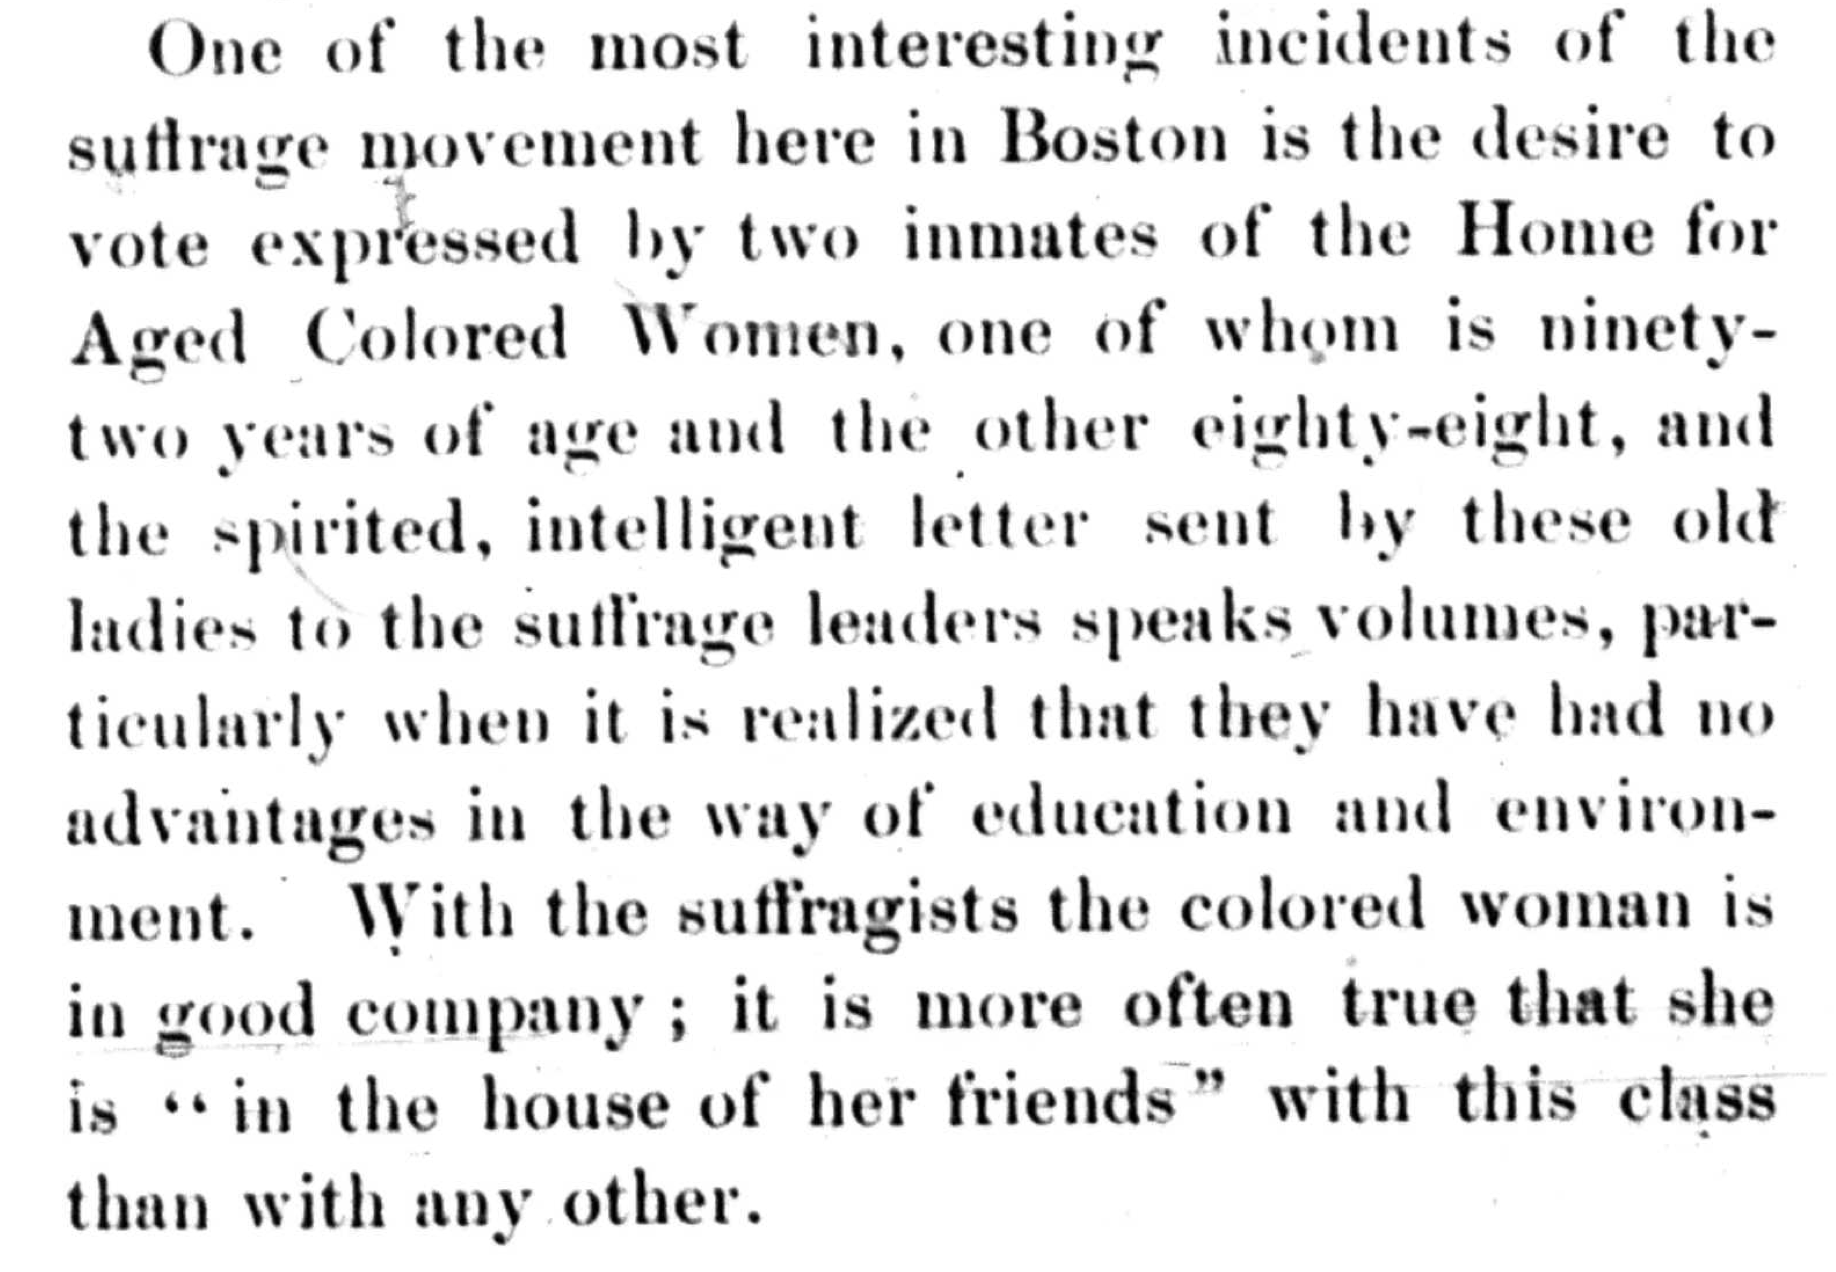 Clipping of the article "Colored Women and Suffrage" in the Woman's Era Vol. 2, no. 7, November 1895.